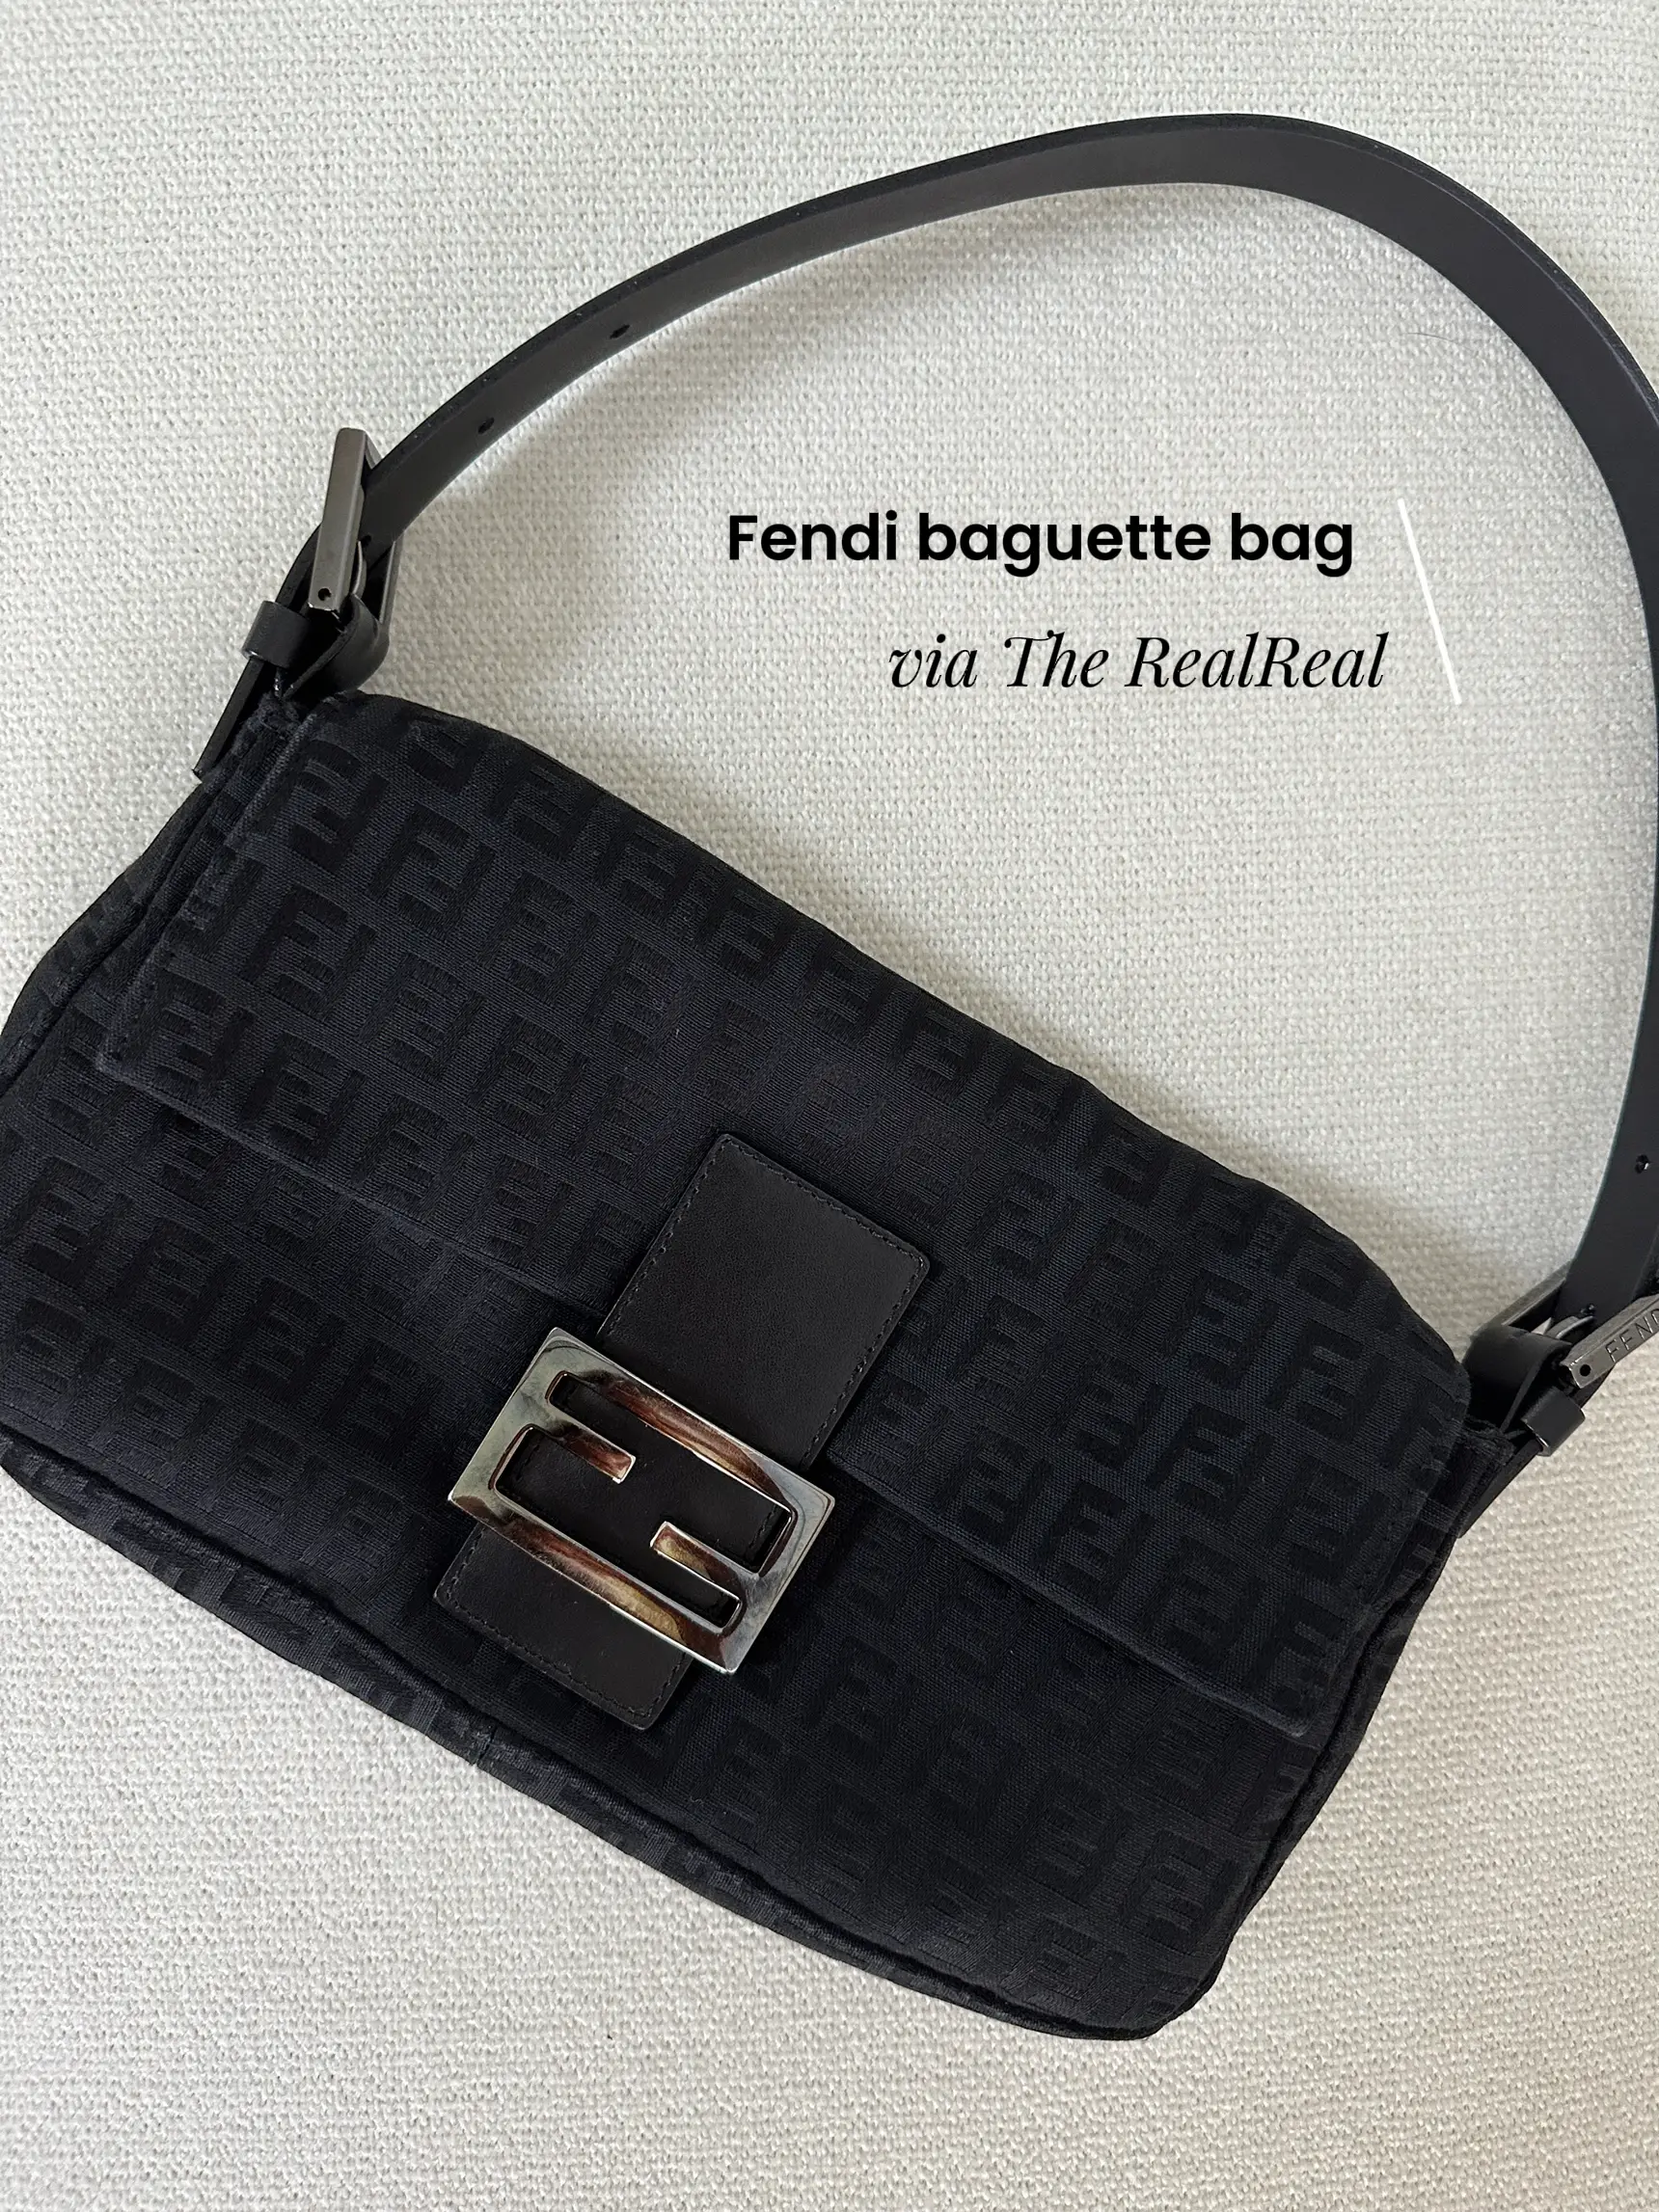 Fashion Finds: Vintage Fendi Baguette Bag, Gallery posted by Larissa  Montana